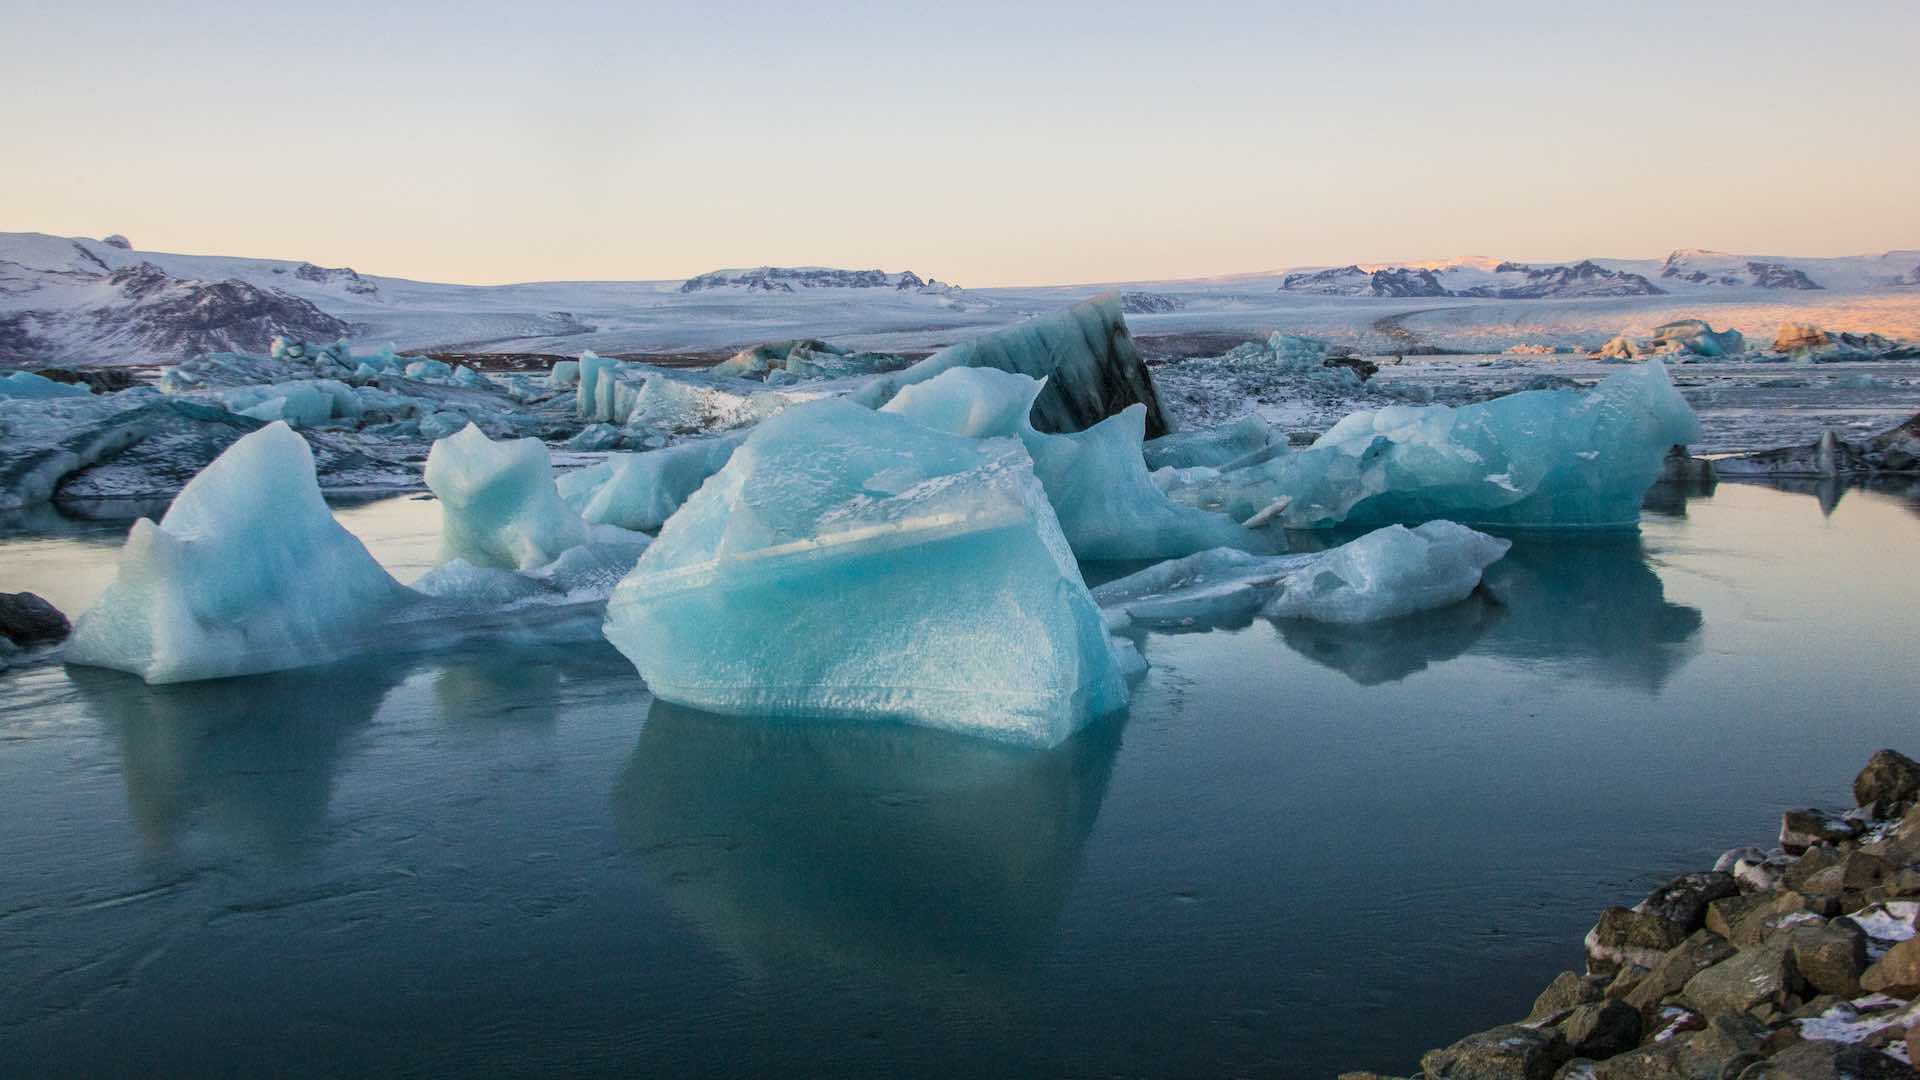 Global warming will not stop half of the glaciers from melting, a study warns